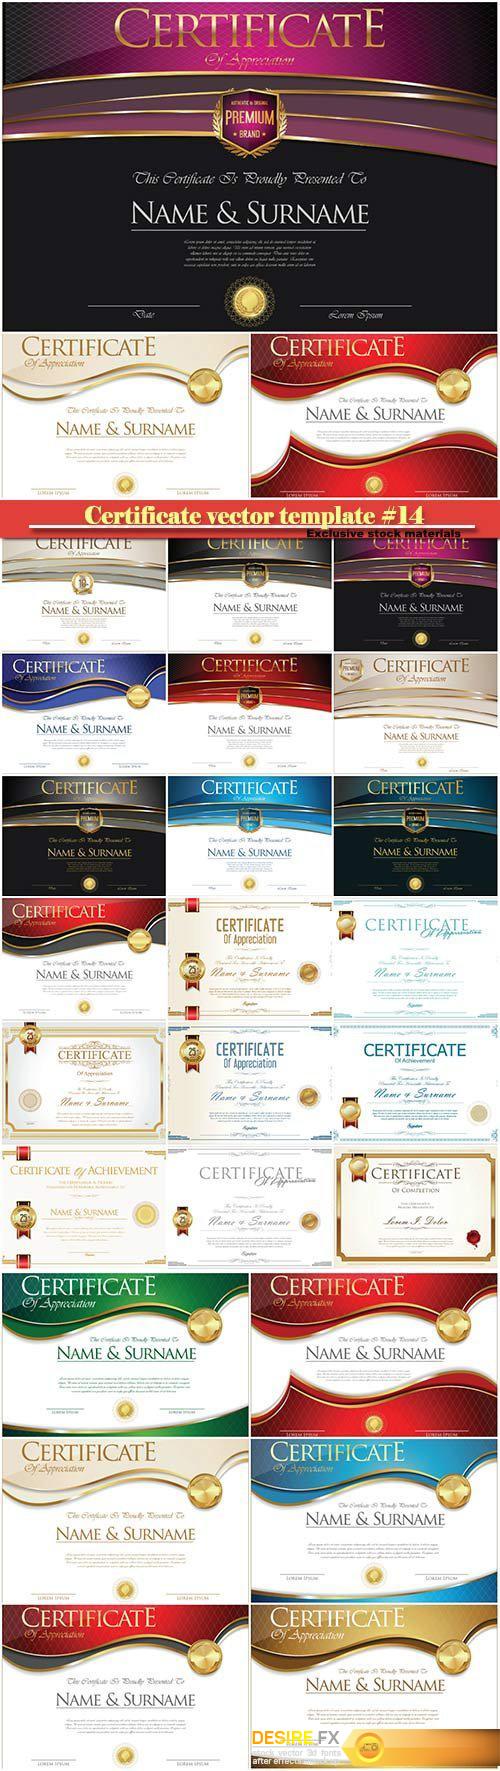 Certificate and vector diploma design template #14